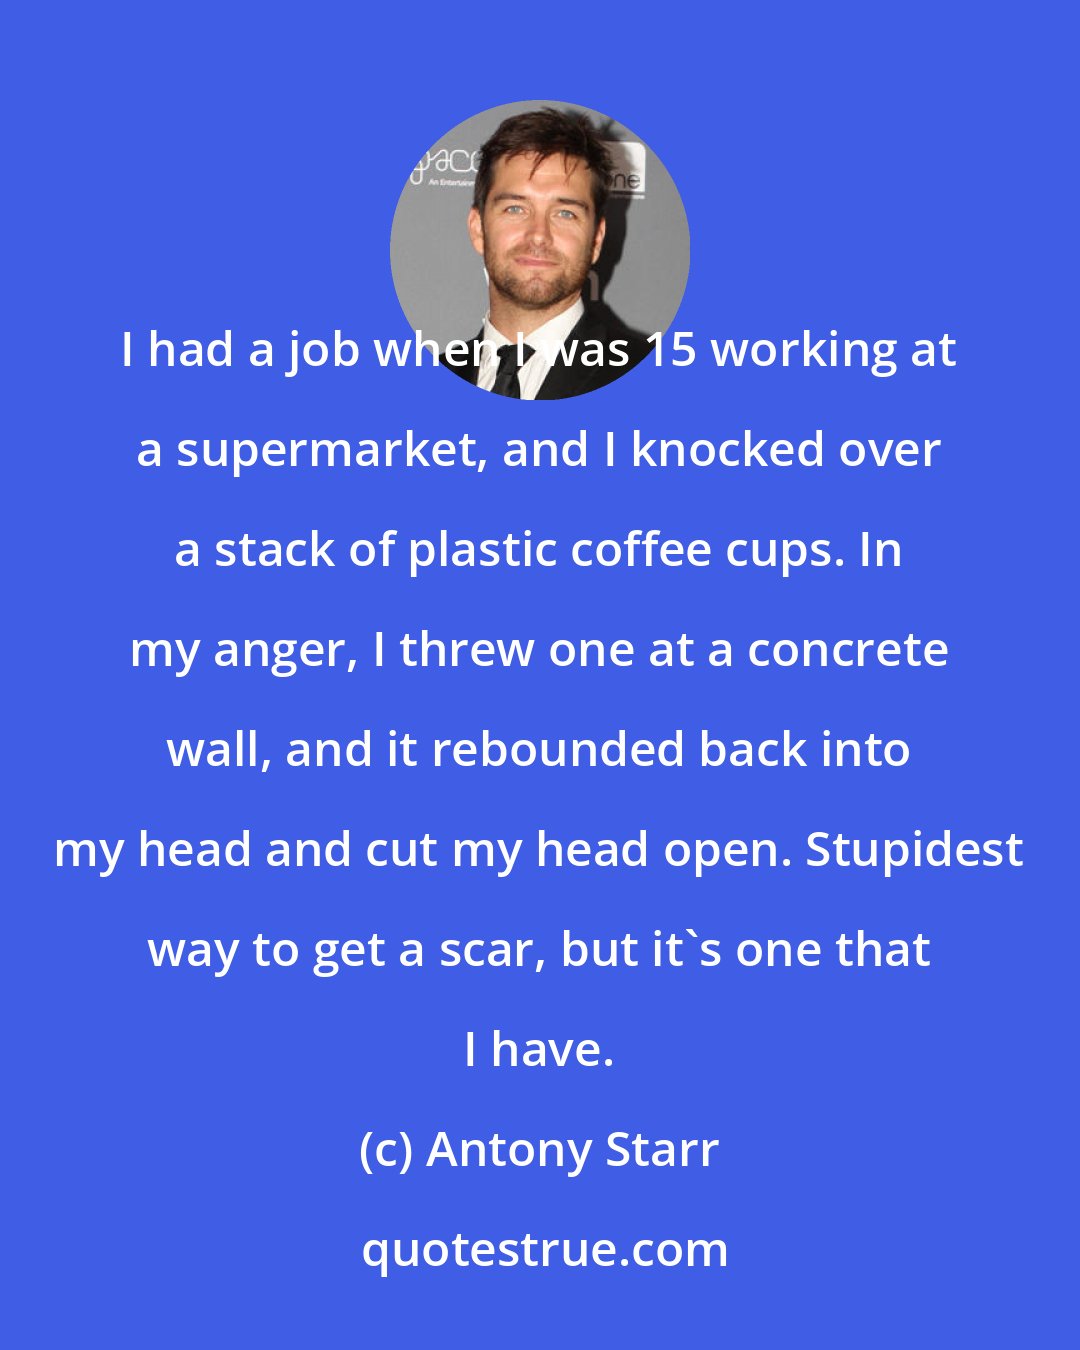 Antony Starr: I had a job when I was 15 working at a supermarket, and I knocked over a stack of plastic coffee cups. In my anger, I threw one at a concrete wall, and it rebounded back into my head and cut my head open. Stupidest way to get a scar, but it's one that I have.